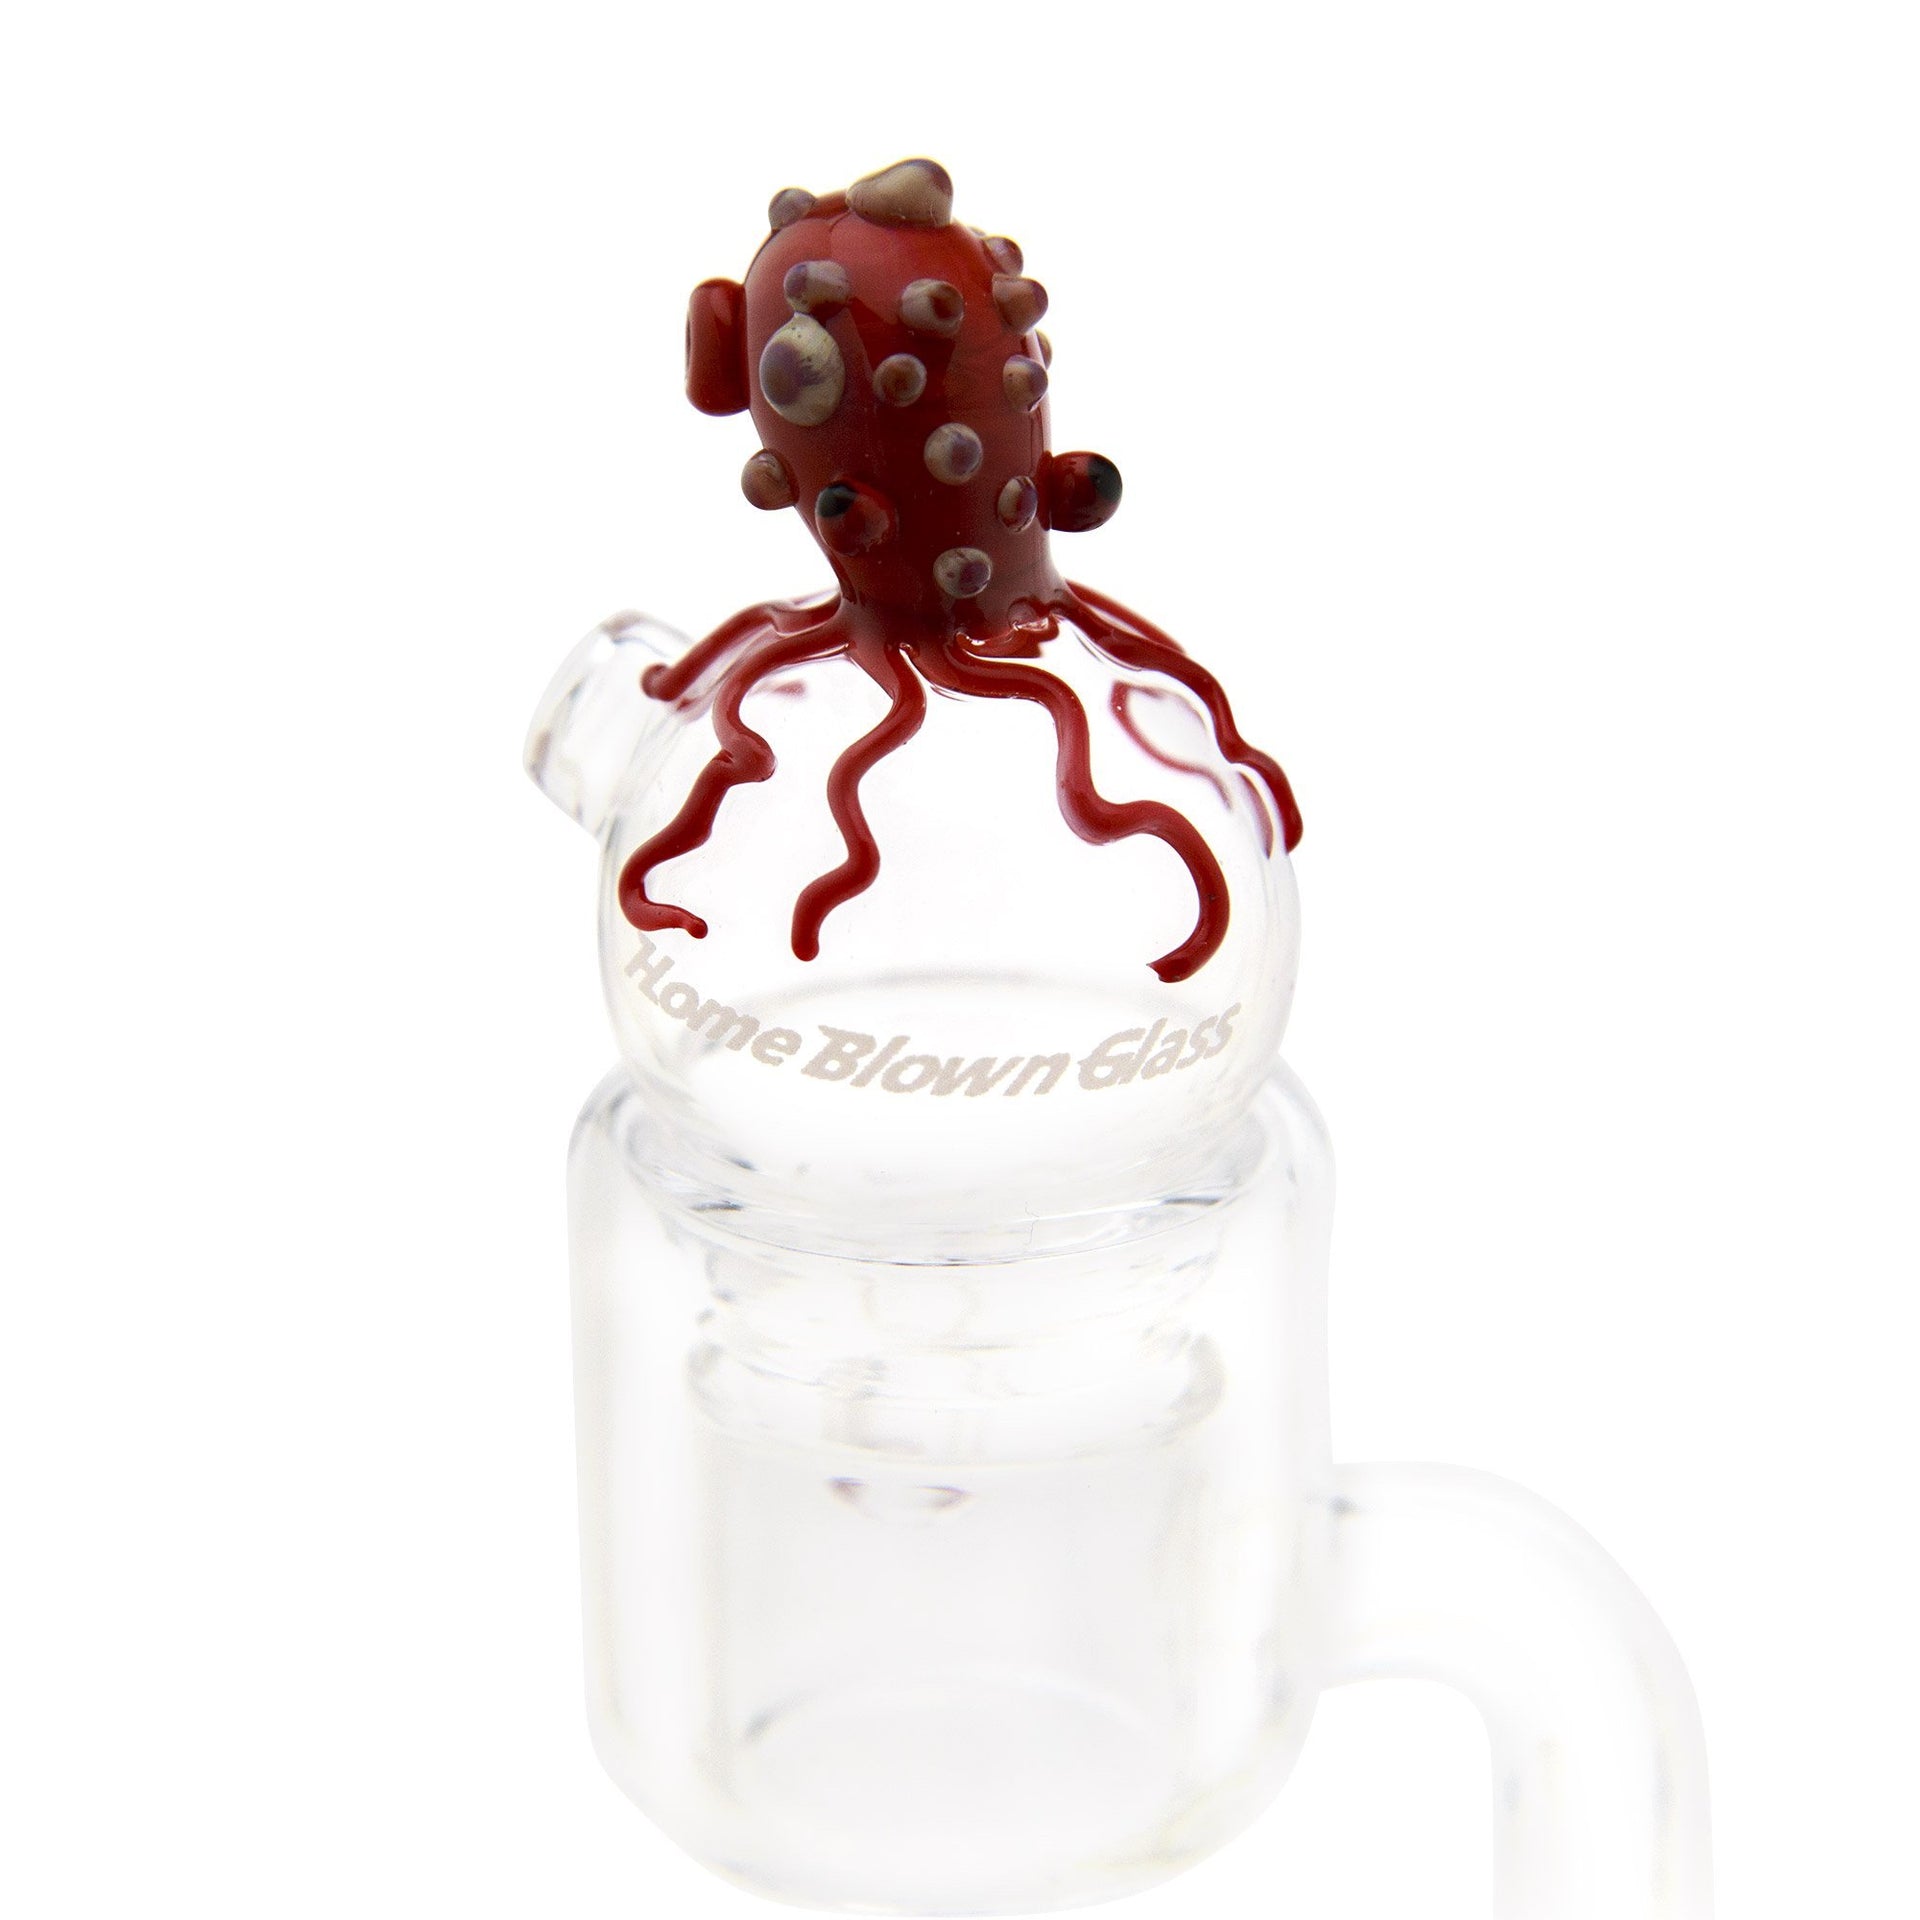 Home Blown Glass Bubble Carb Cap - Turtle - 420 Science - The most trusted online smoke shop.